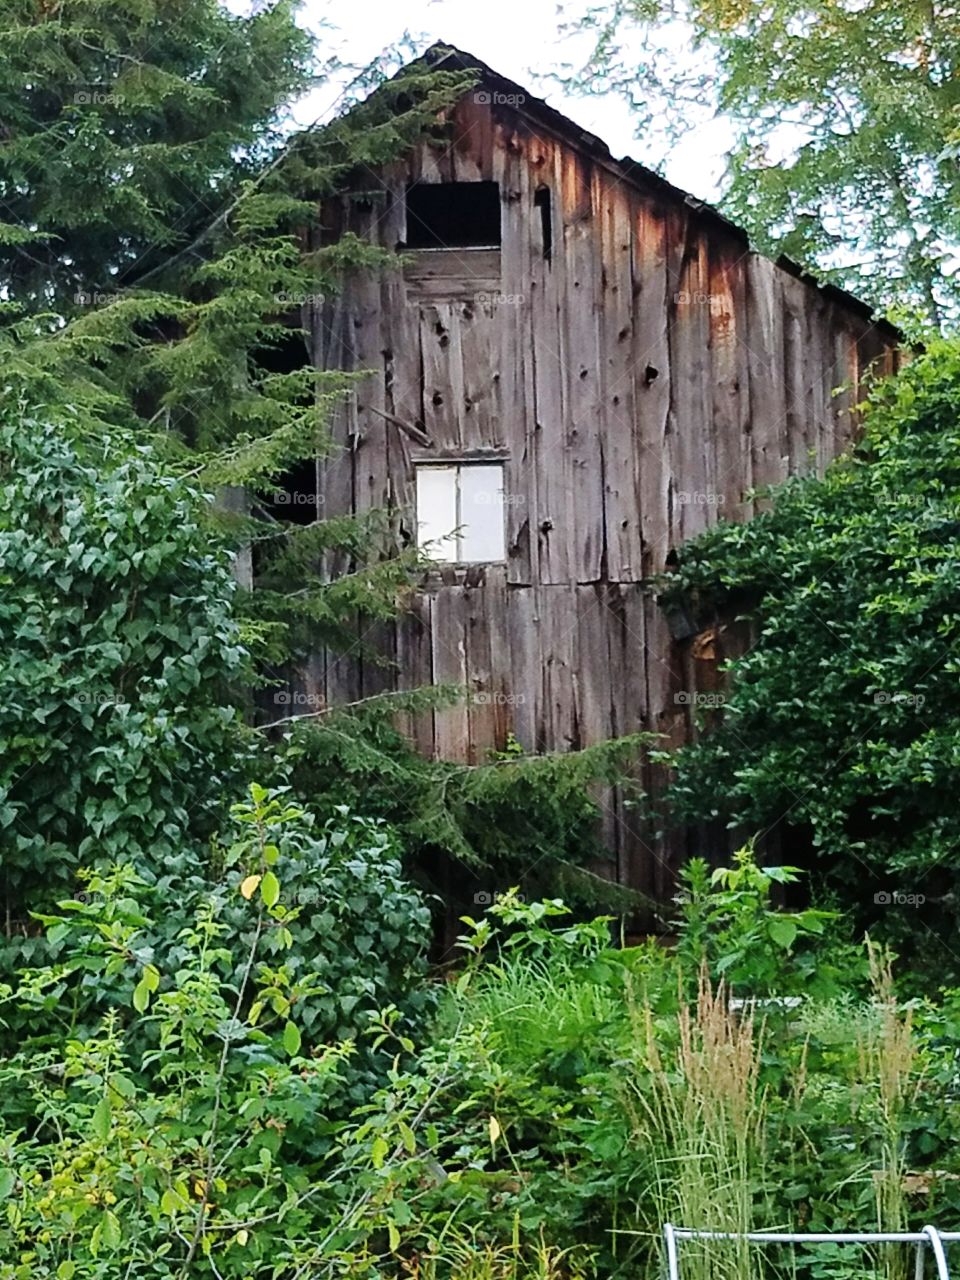 The side of an old barn tucked away in the foliage.